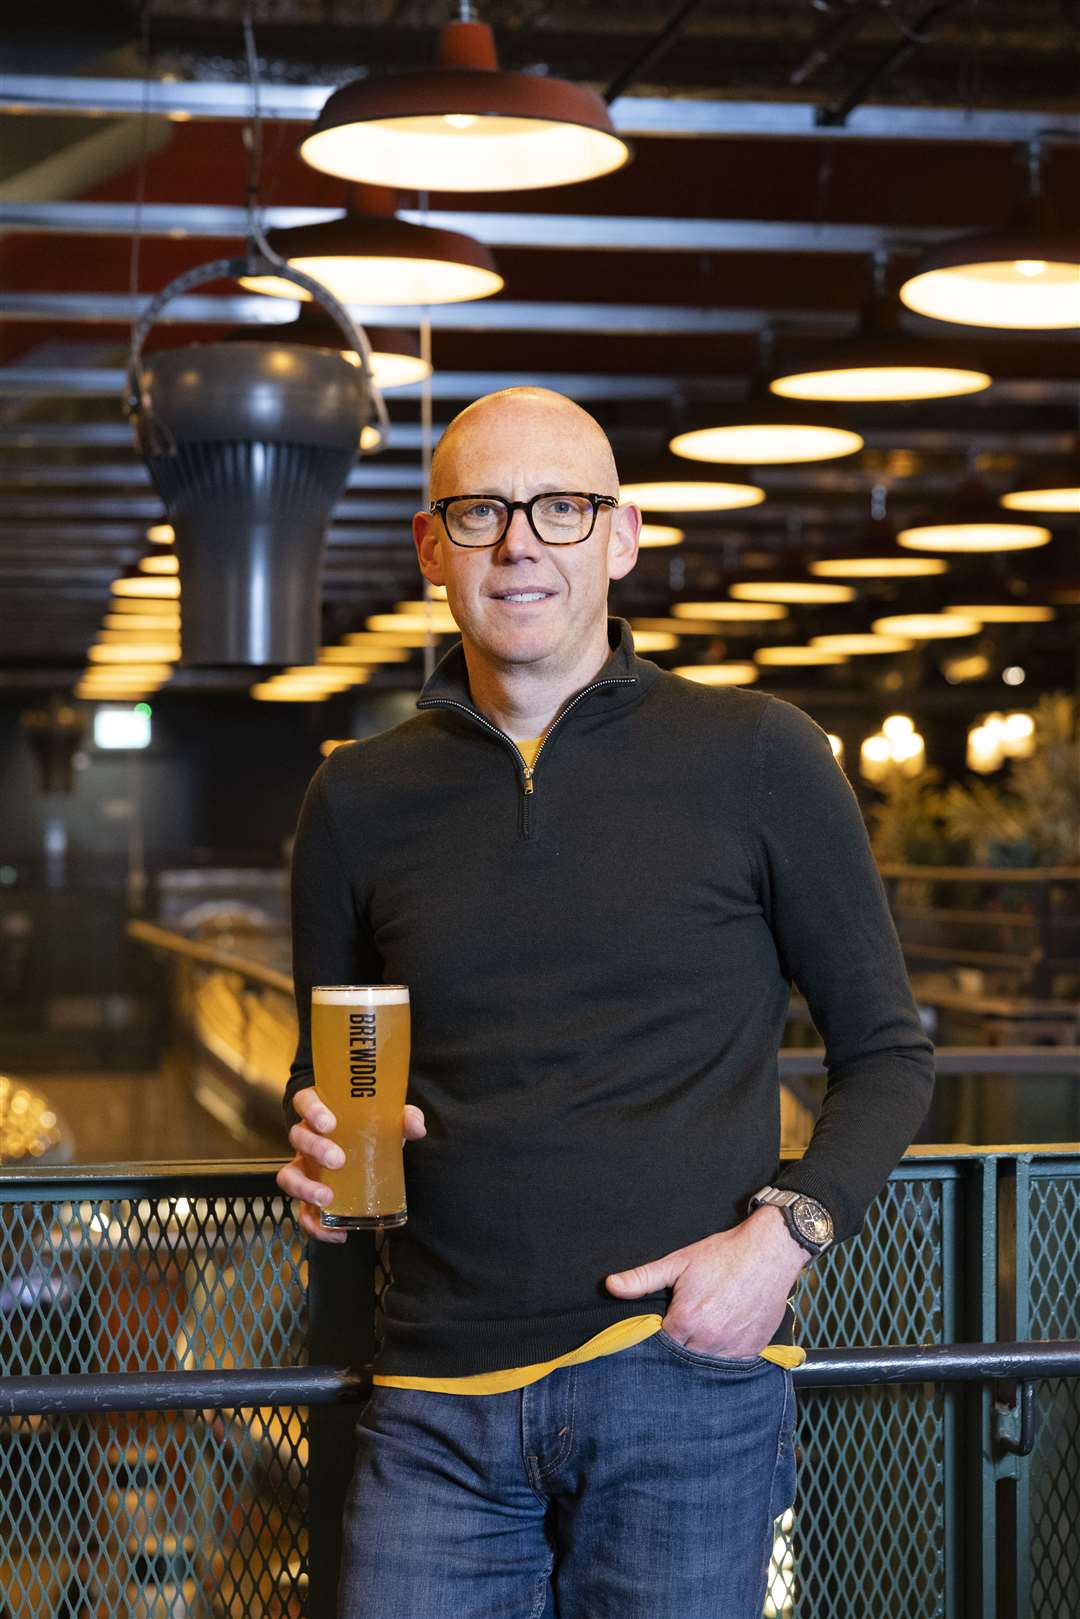 New BrewDog boss James Arrow was hired last year as chief operating officer as part of succession planning (BrewDog/PA)